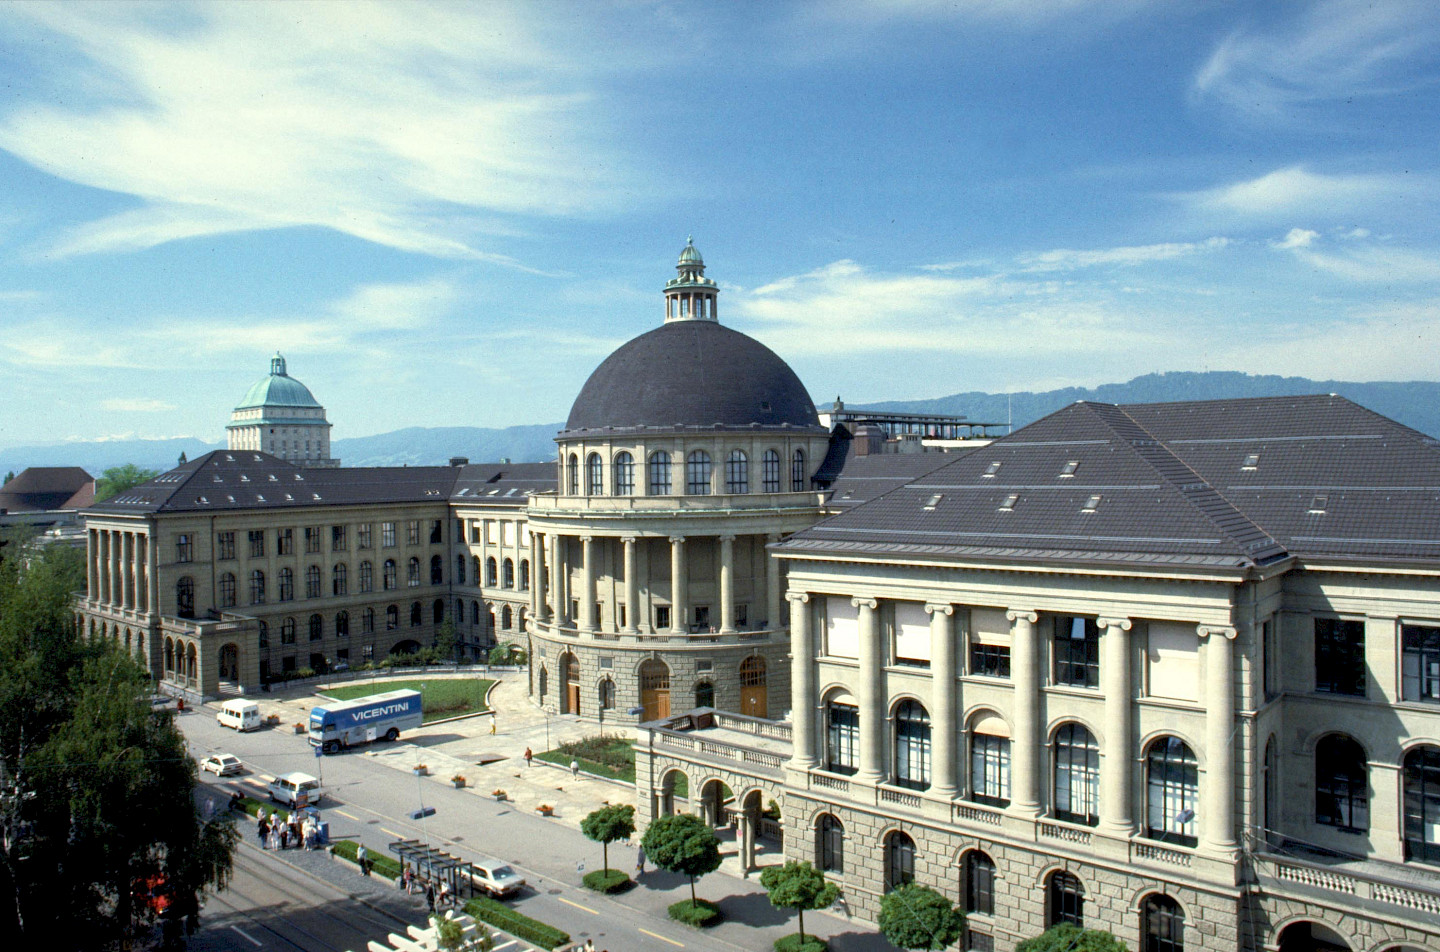 The main building of the ETH Zurich